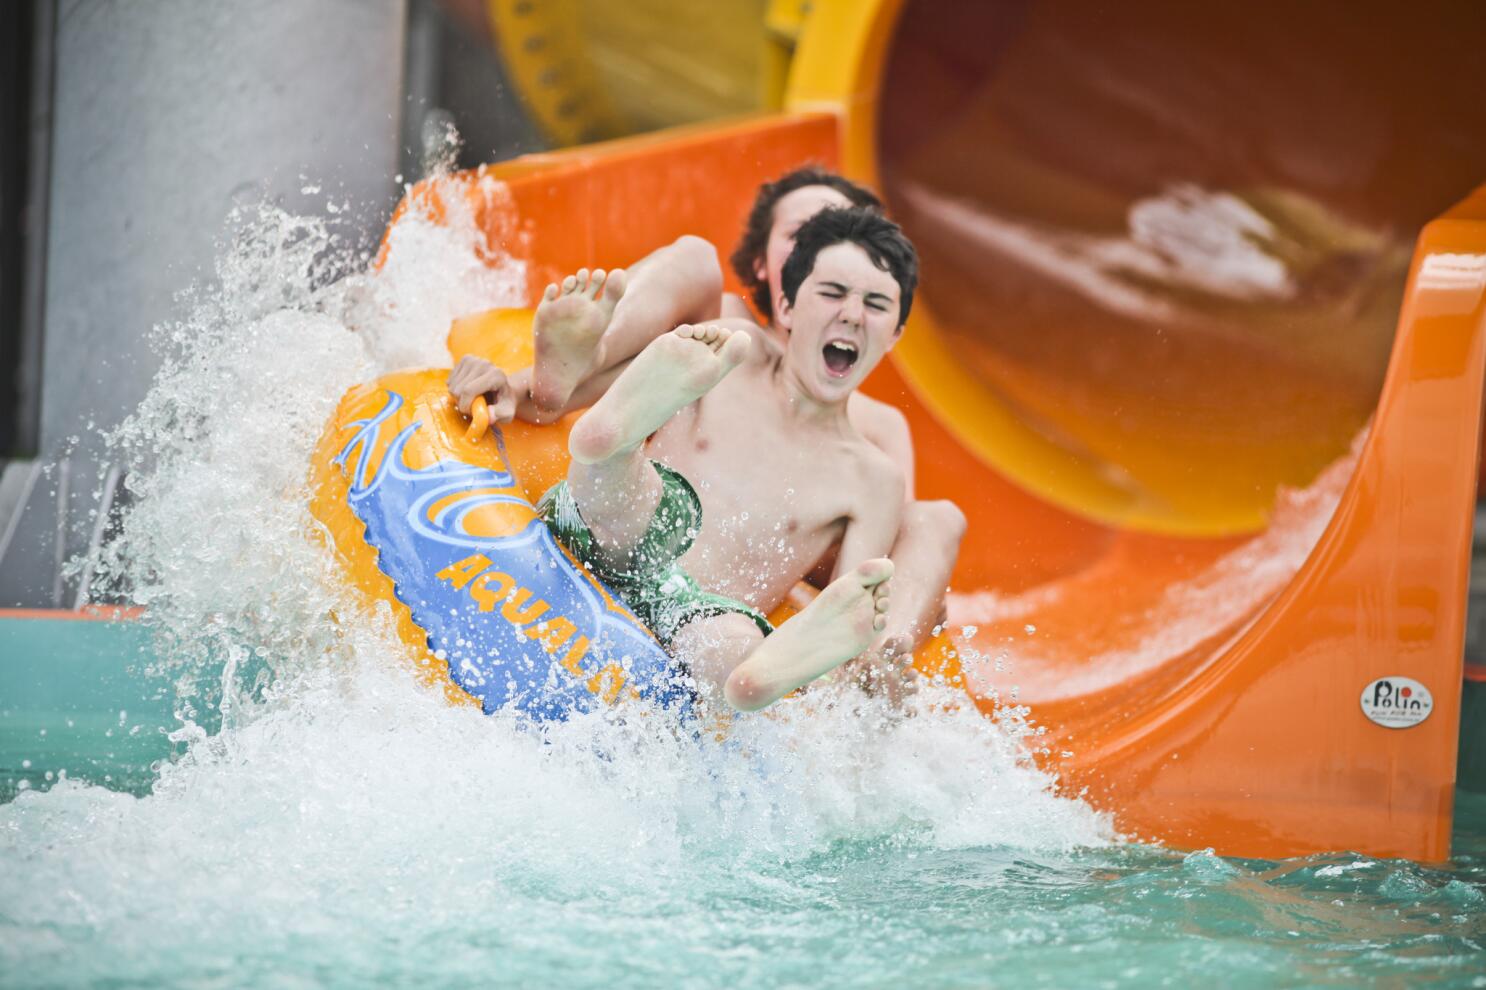 Cowabunga Canyon (formerly Wet 'n' Wild) Water Park opens on Memorial Day -  Summerlin